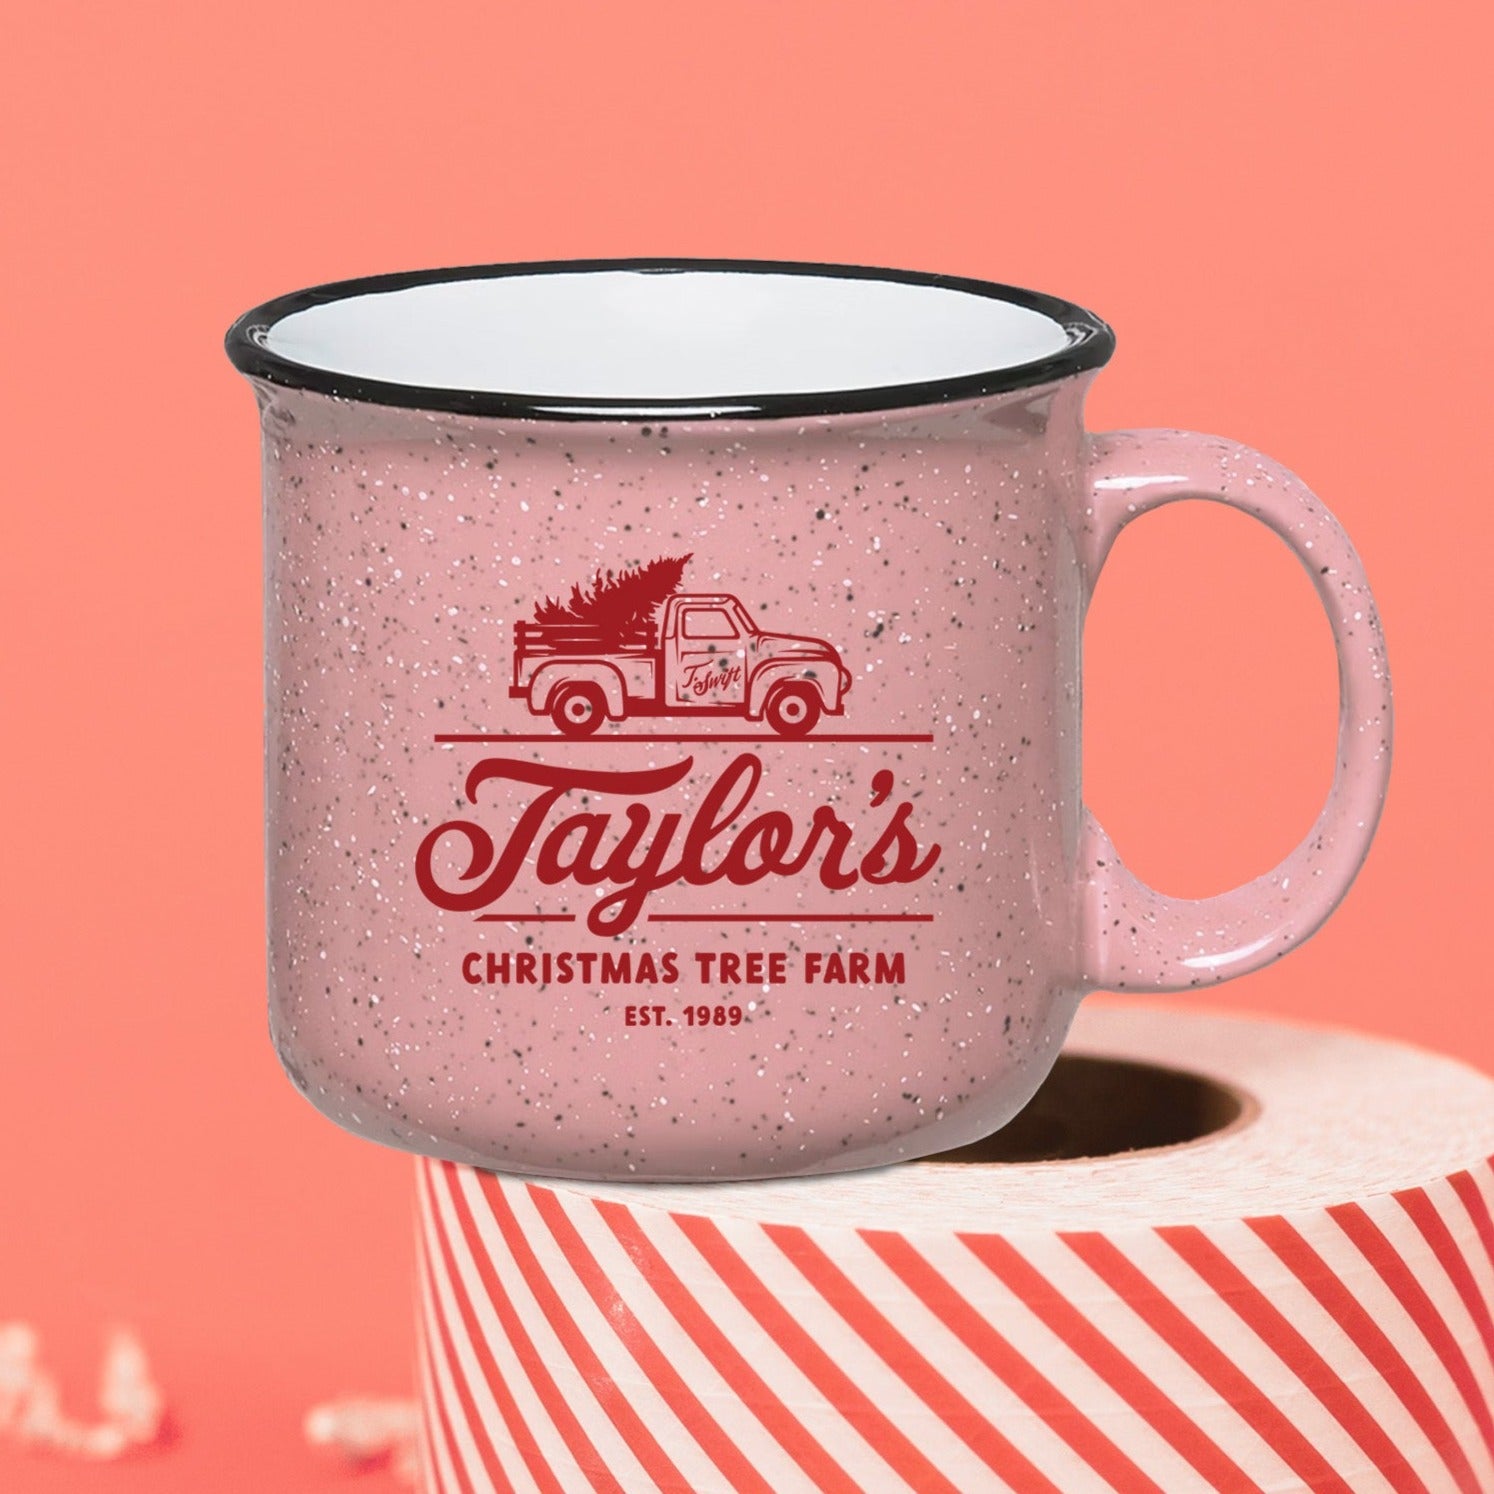 On a coral pink background sits a coffee mug on top of a red and white striped packing tape with white crinkle and big, colorful confetti scattered around. There are mini disco balls.  This Taylor Swift inspired pink campfire mug has a red vintage truck with a tree and it says "Taylor's CHRISTMAS TREE FARM EST. 1989" in red hand lettering and it also says "Tis the damn season" in red hand lettering at the bottom.